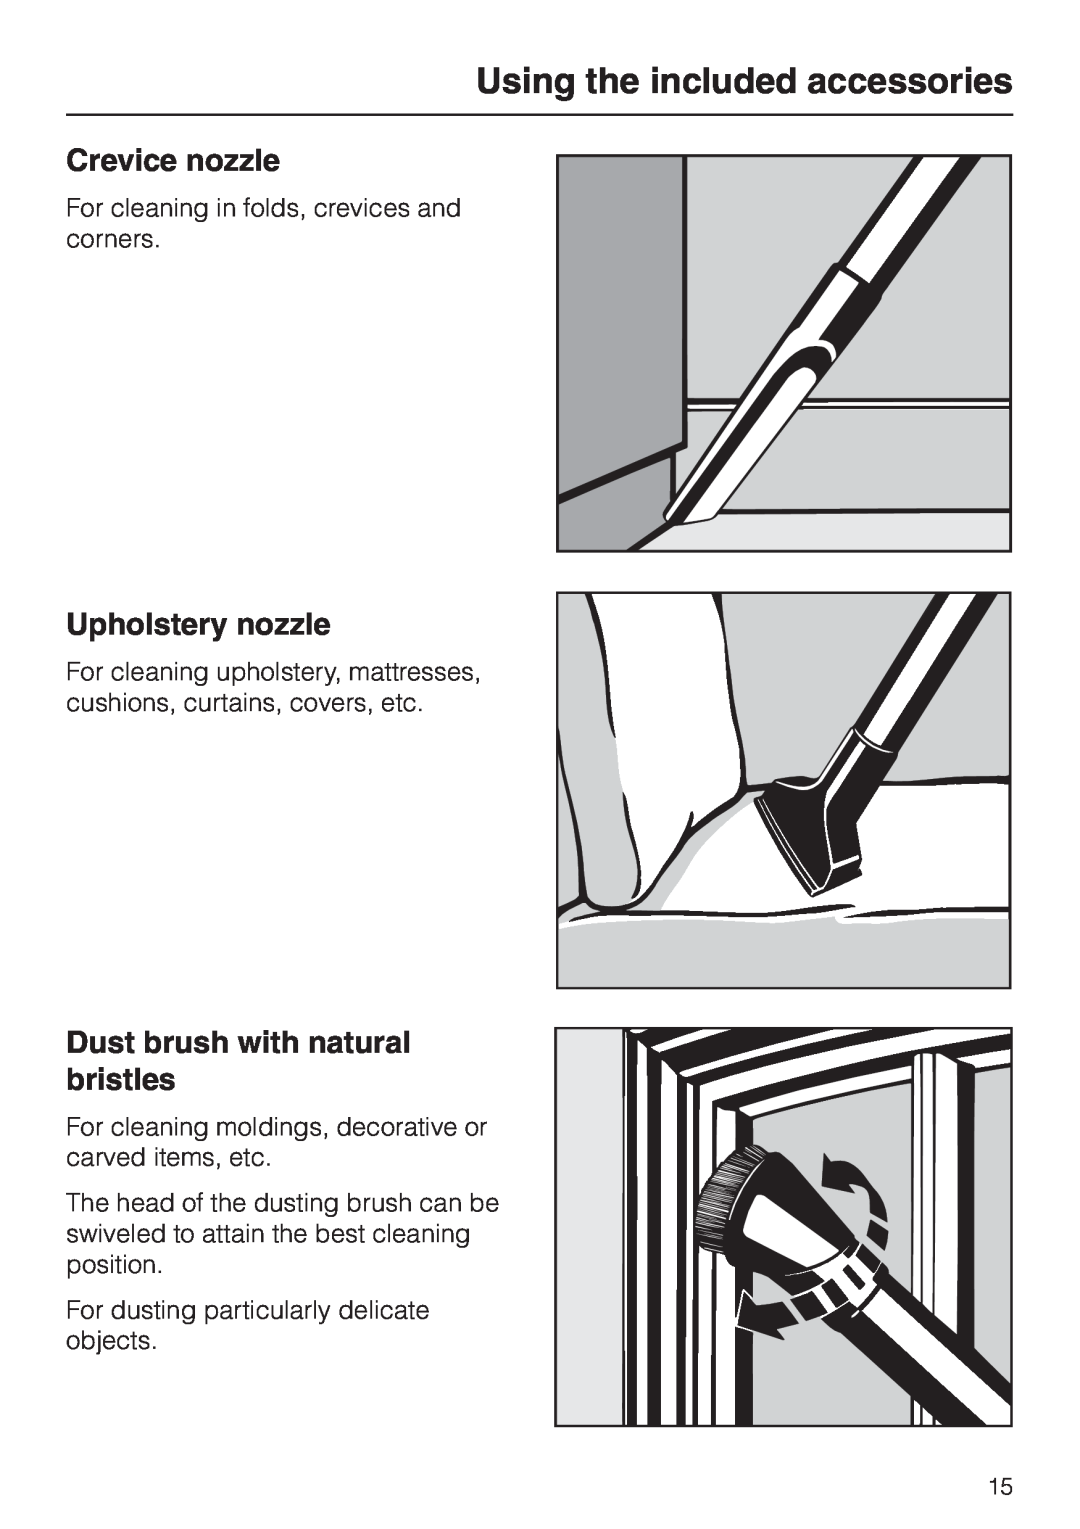 Miele S 4000 manual Using the included accessories, Crevice nozzle, Upholstery nozzle, Dust brush with natural bristles 